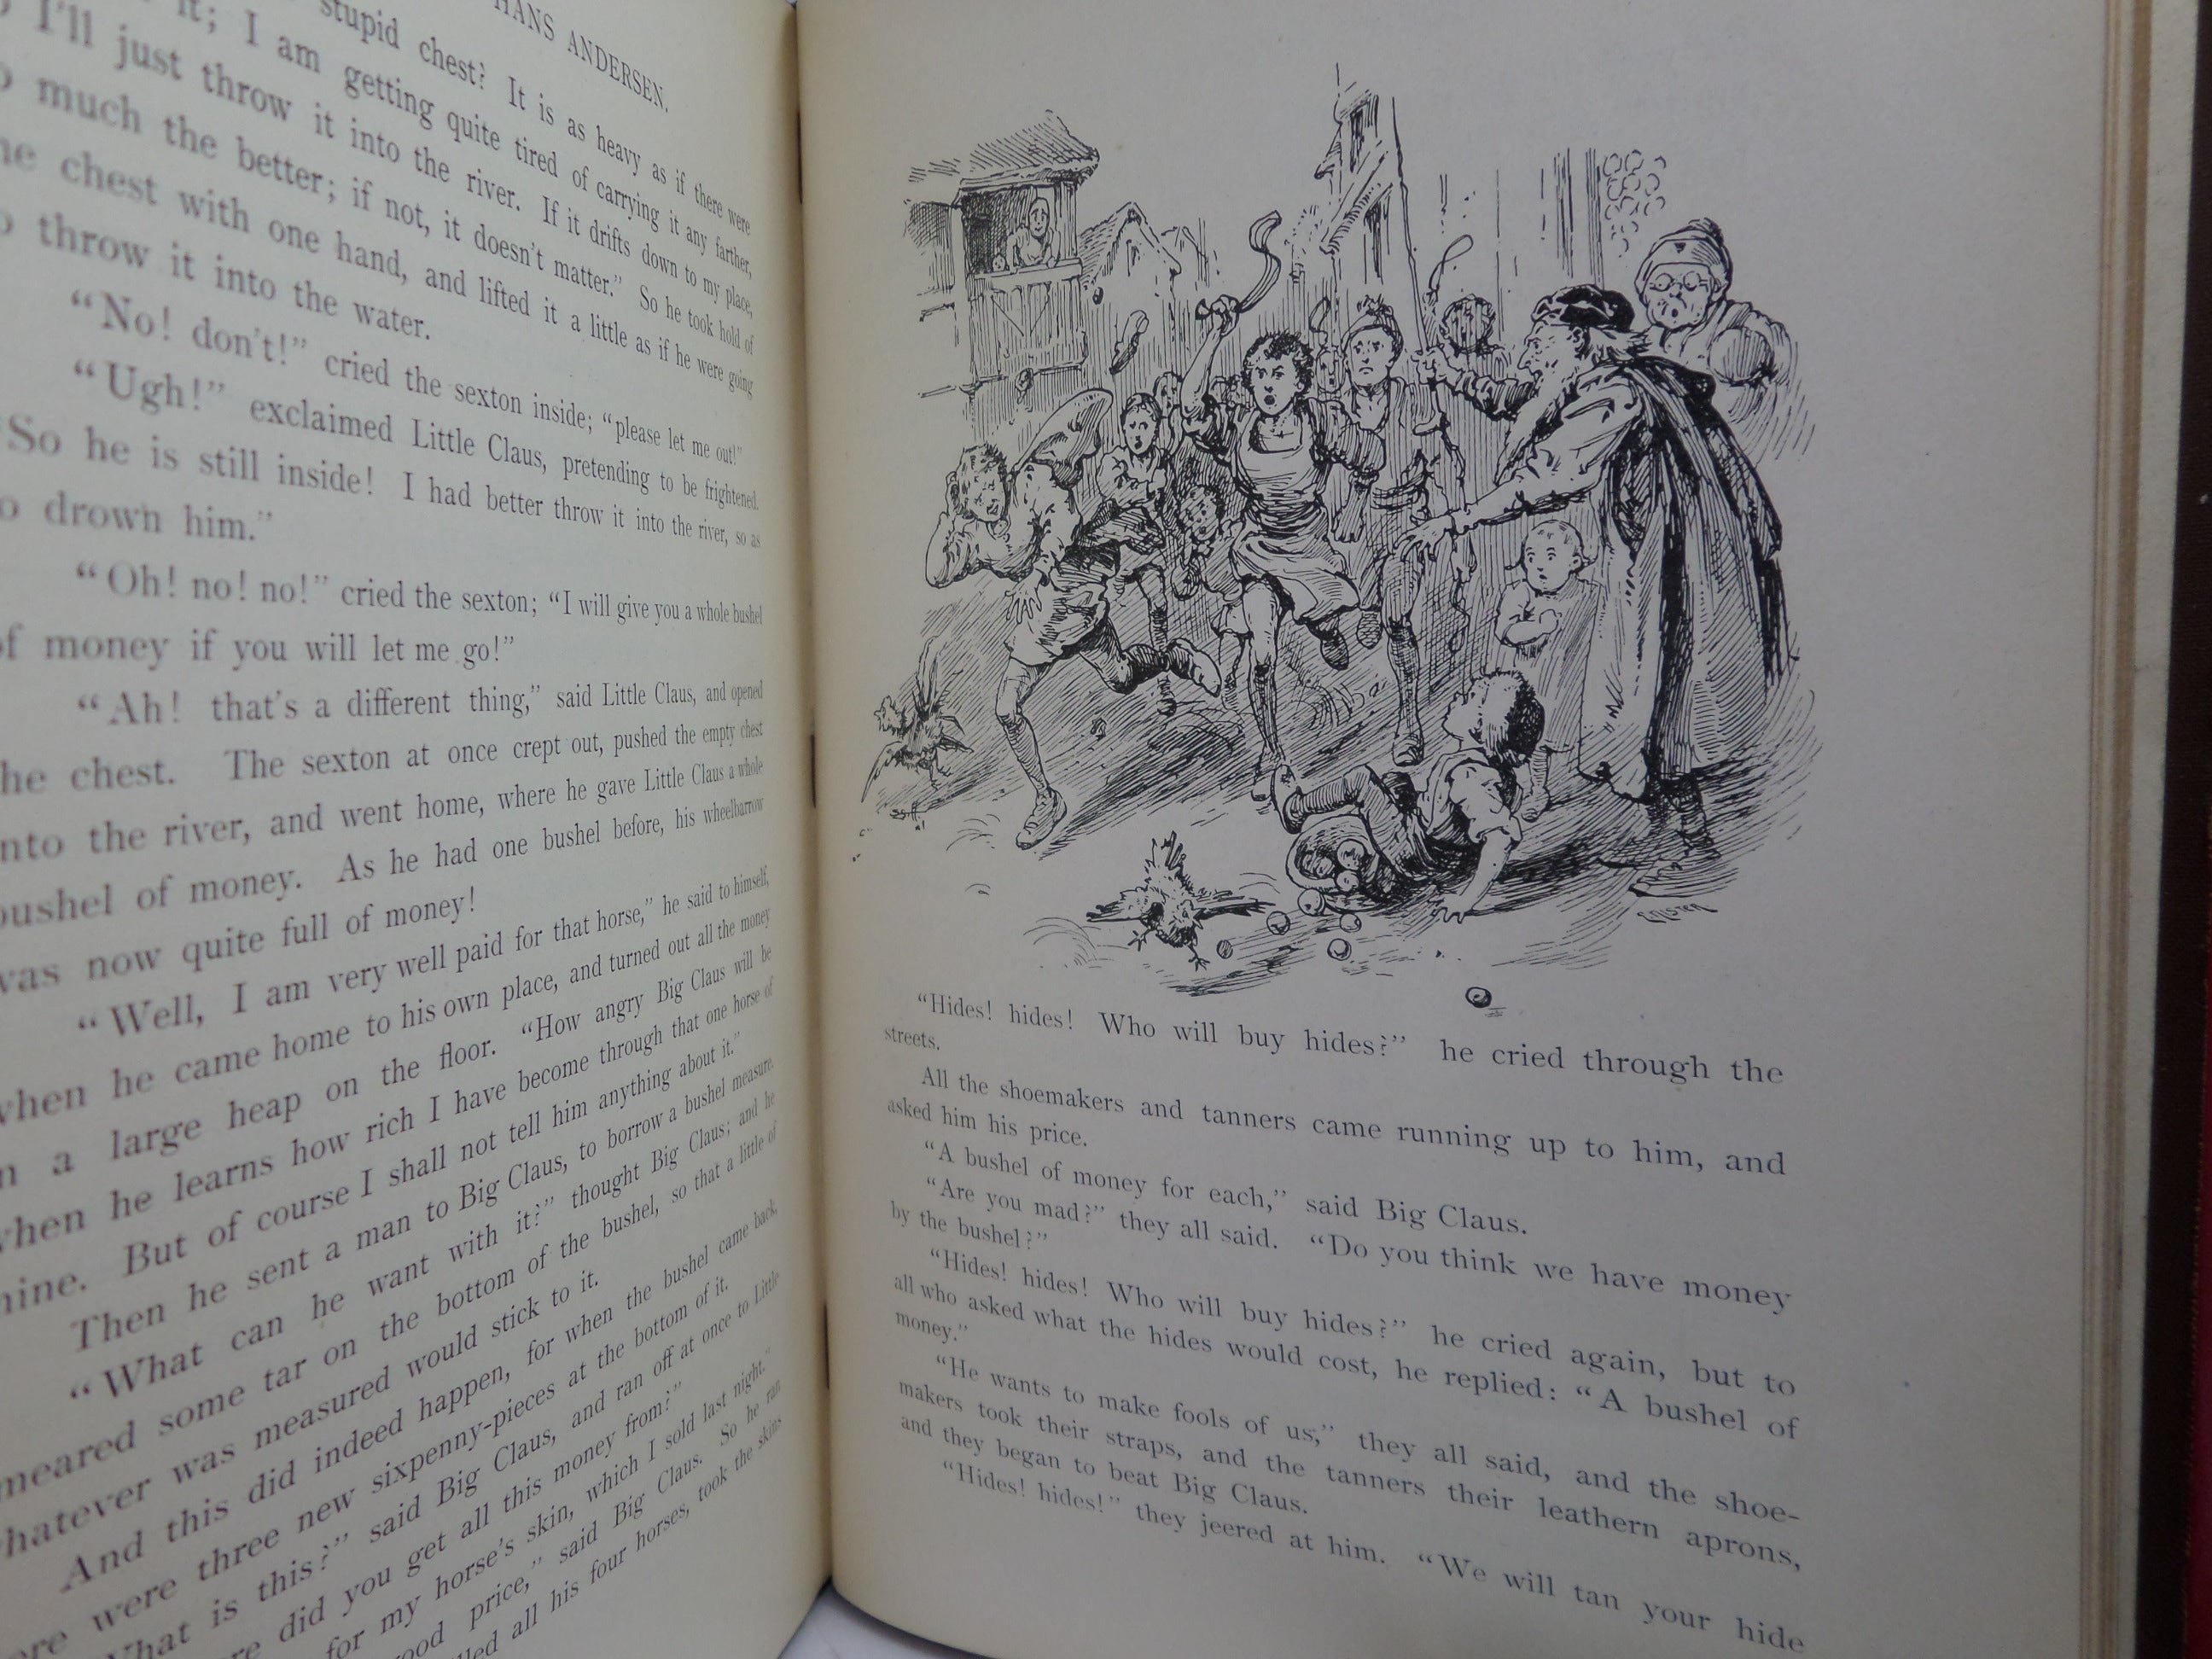 STORIES FROM HANS CHRISTIAN ANDERSEN 1897 ILLUSTRATED BY E.S. HARDY